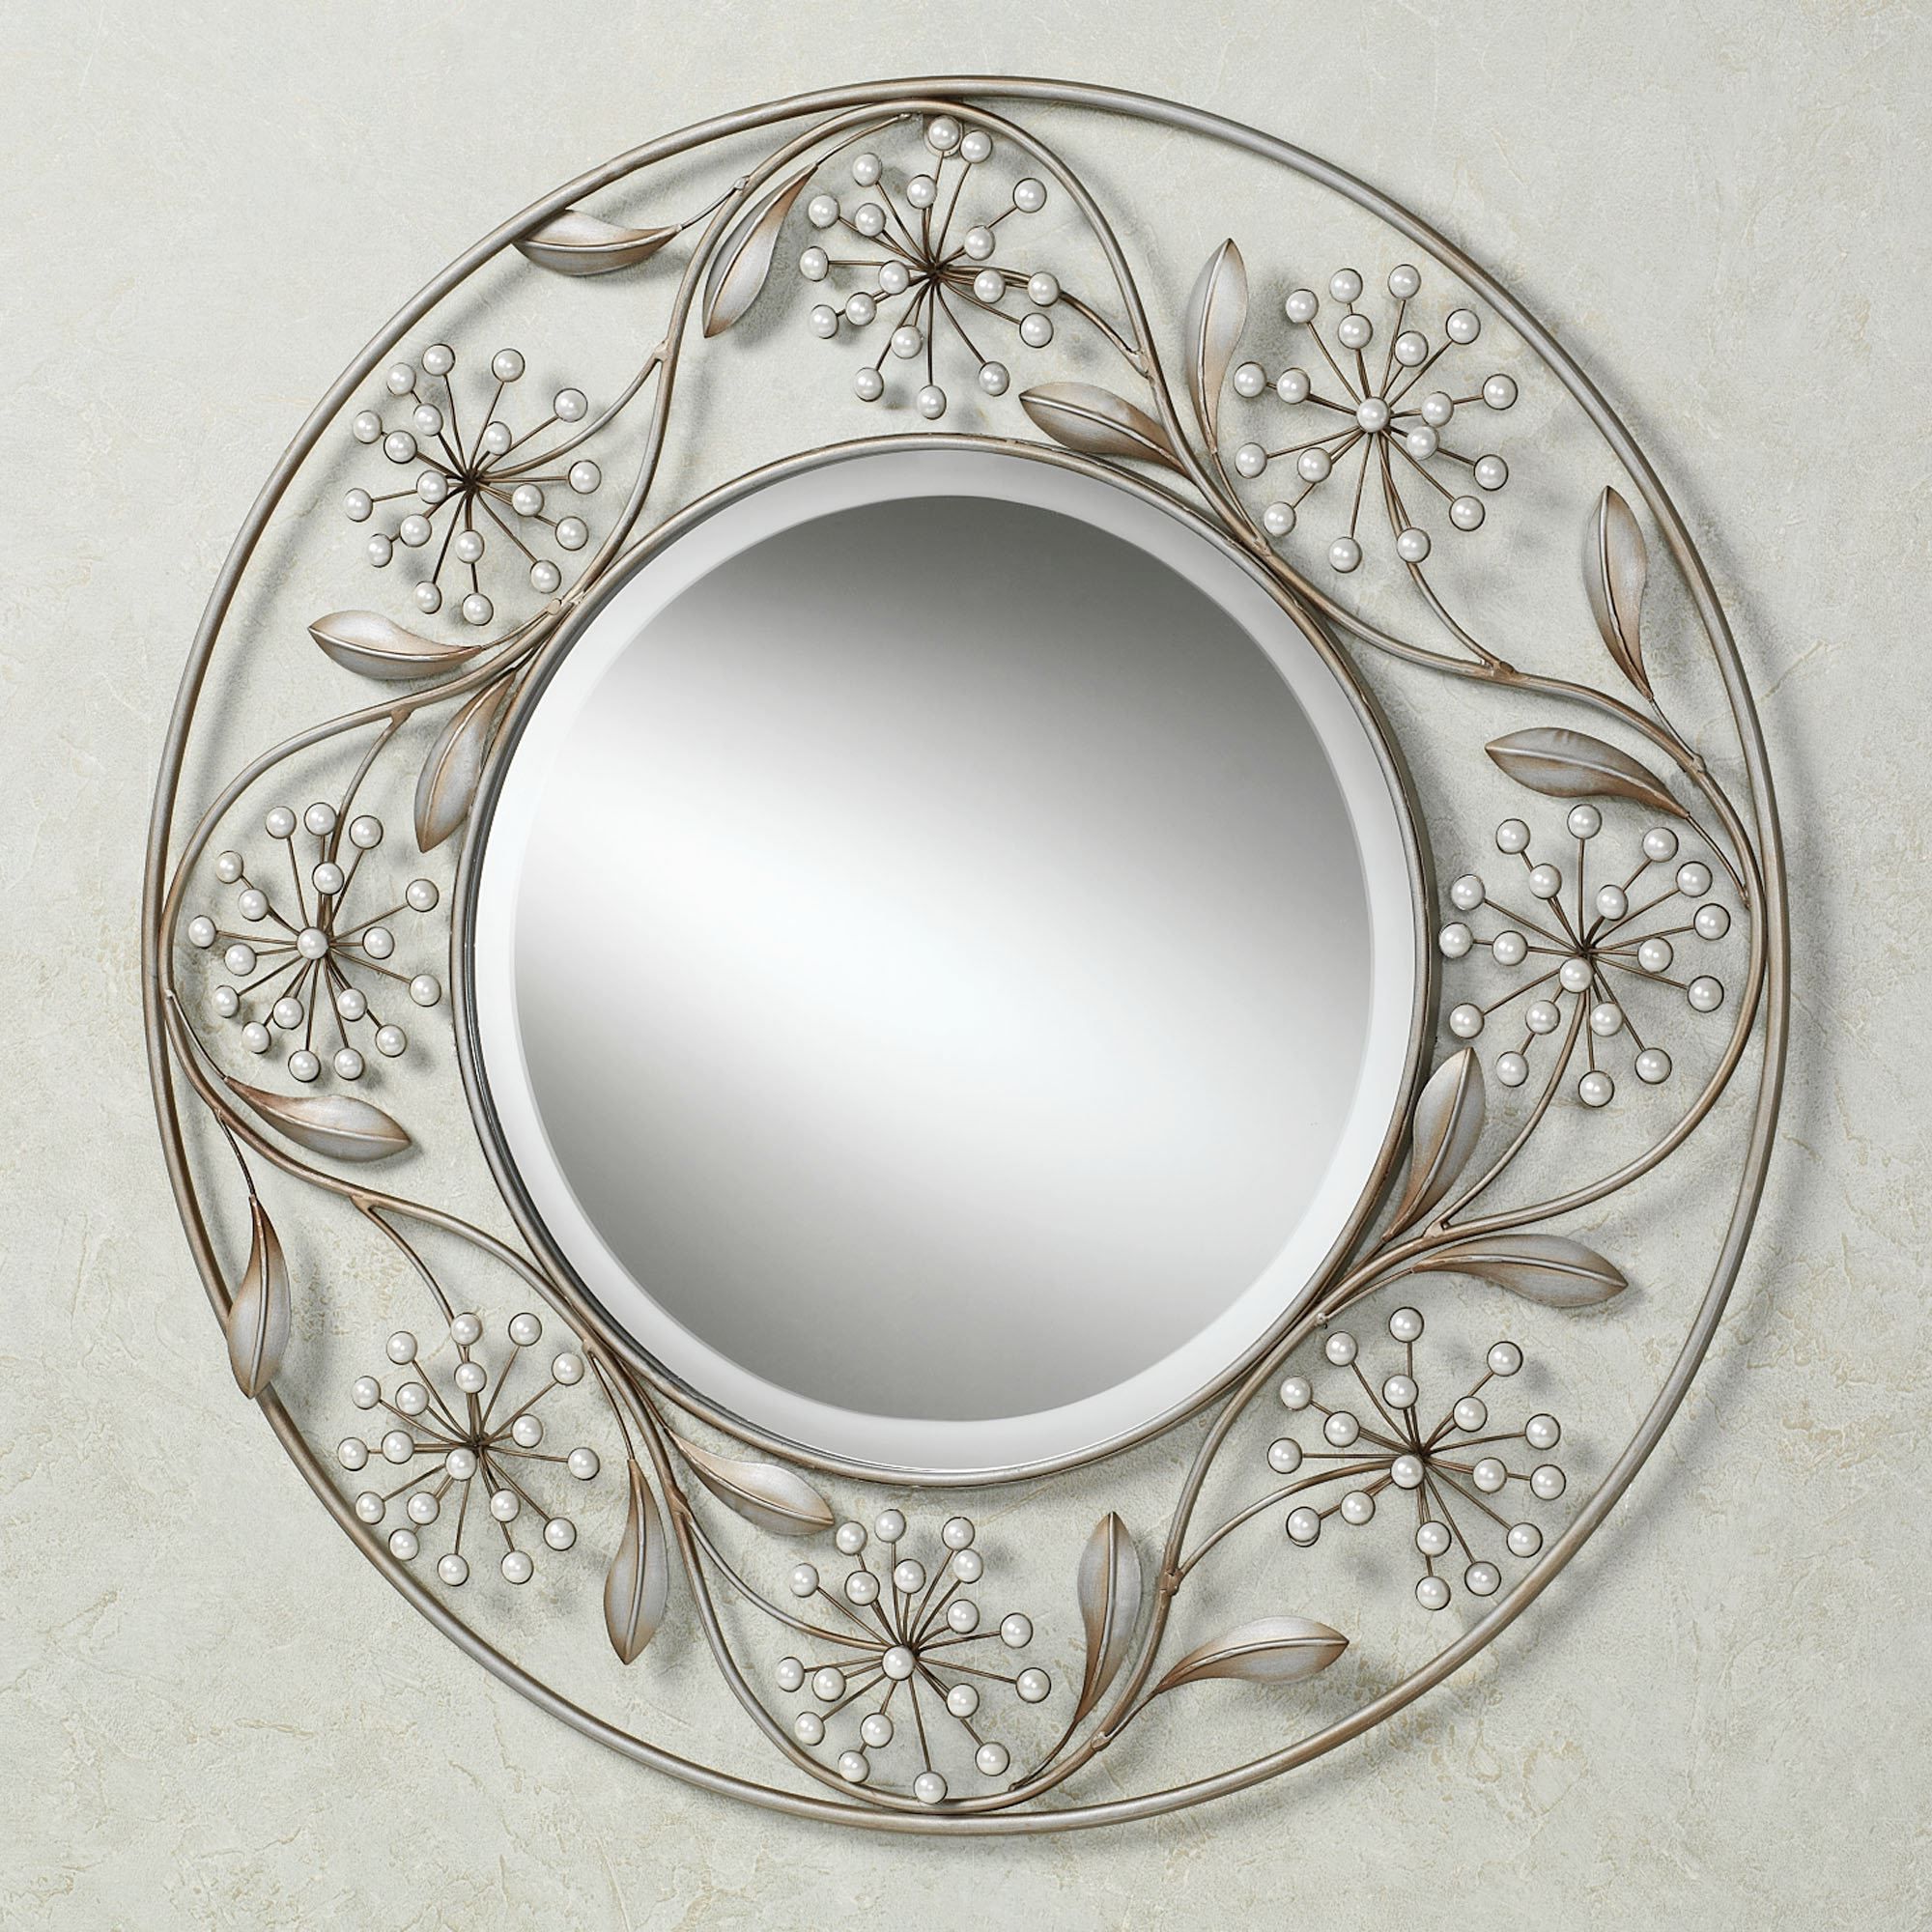 Fashionable Woven Metal Round Wall Mirrors For Pearlette Round Metal Wall Mirror (View 15 of 15)